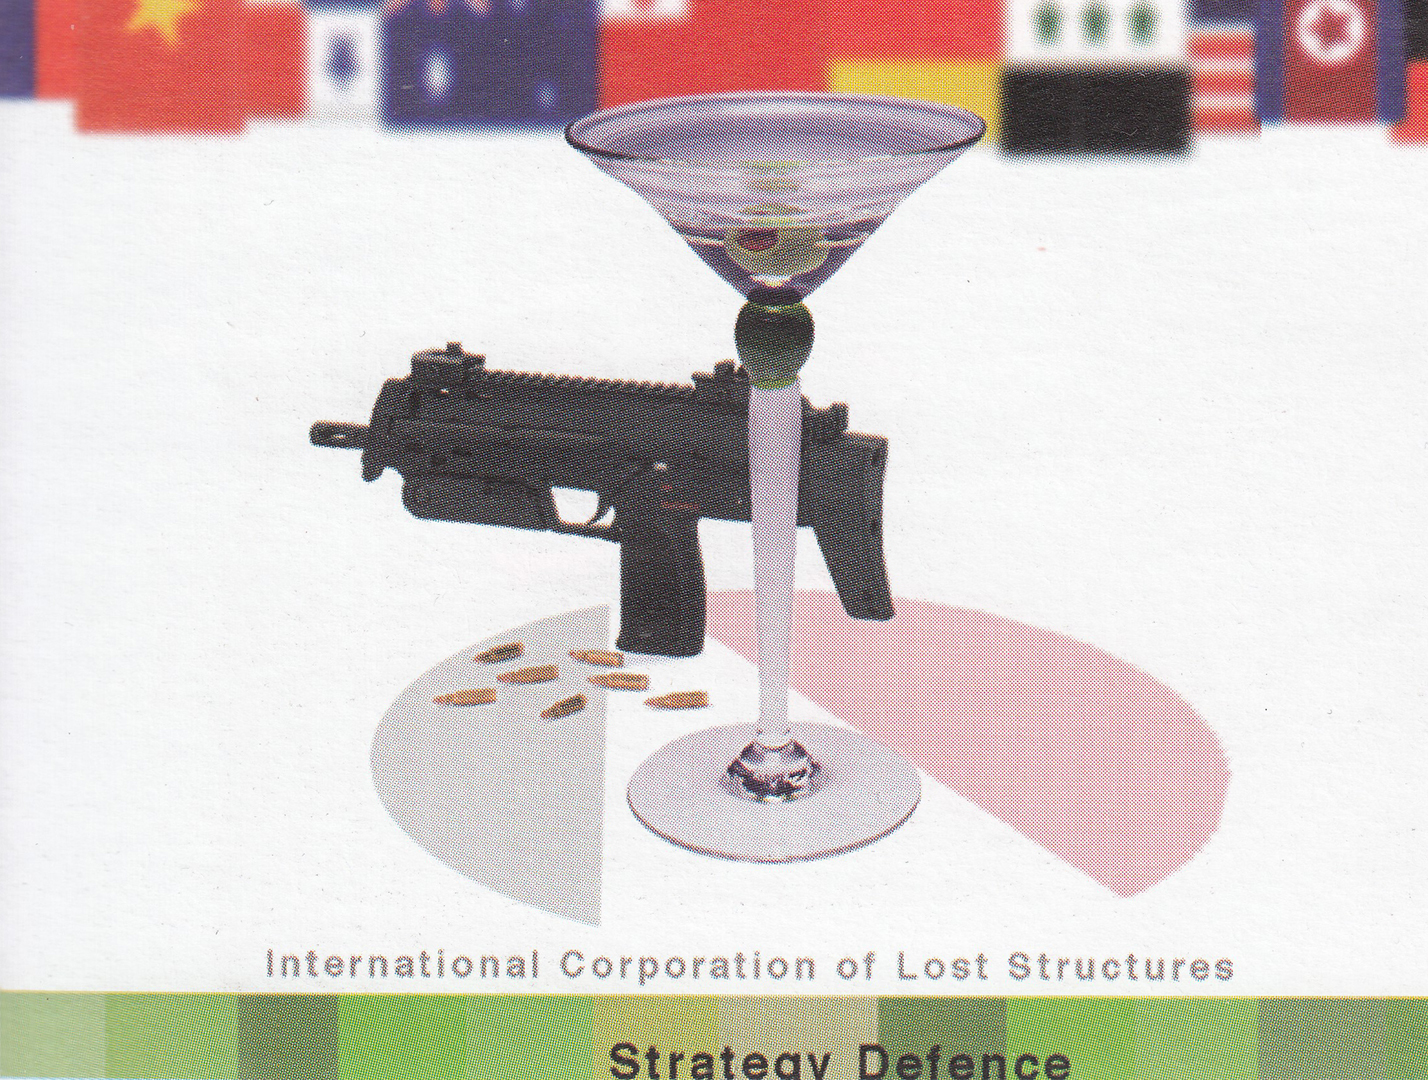 ©, Bronia Iwanczak and Suzanne Treister, The ICOLS’ Strategy, Defense and Arms